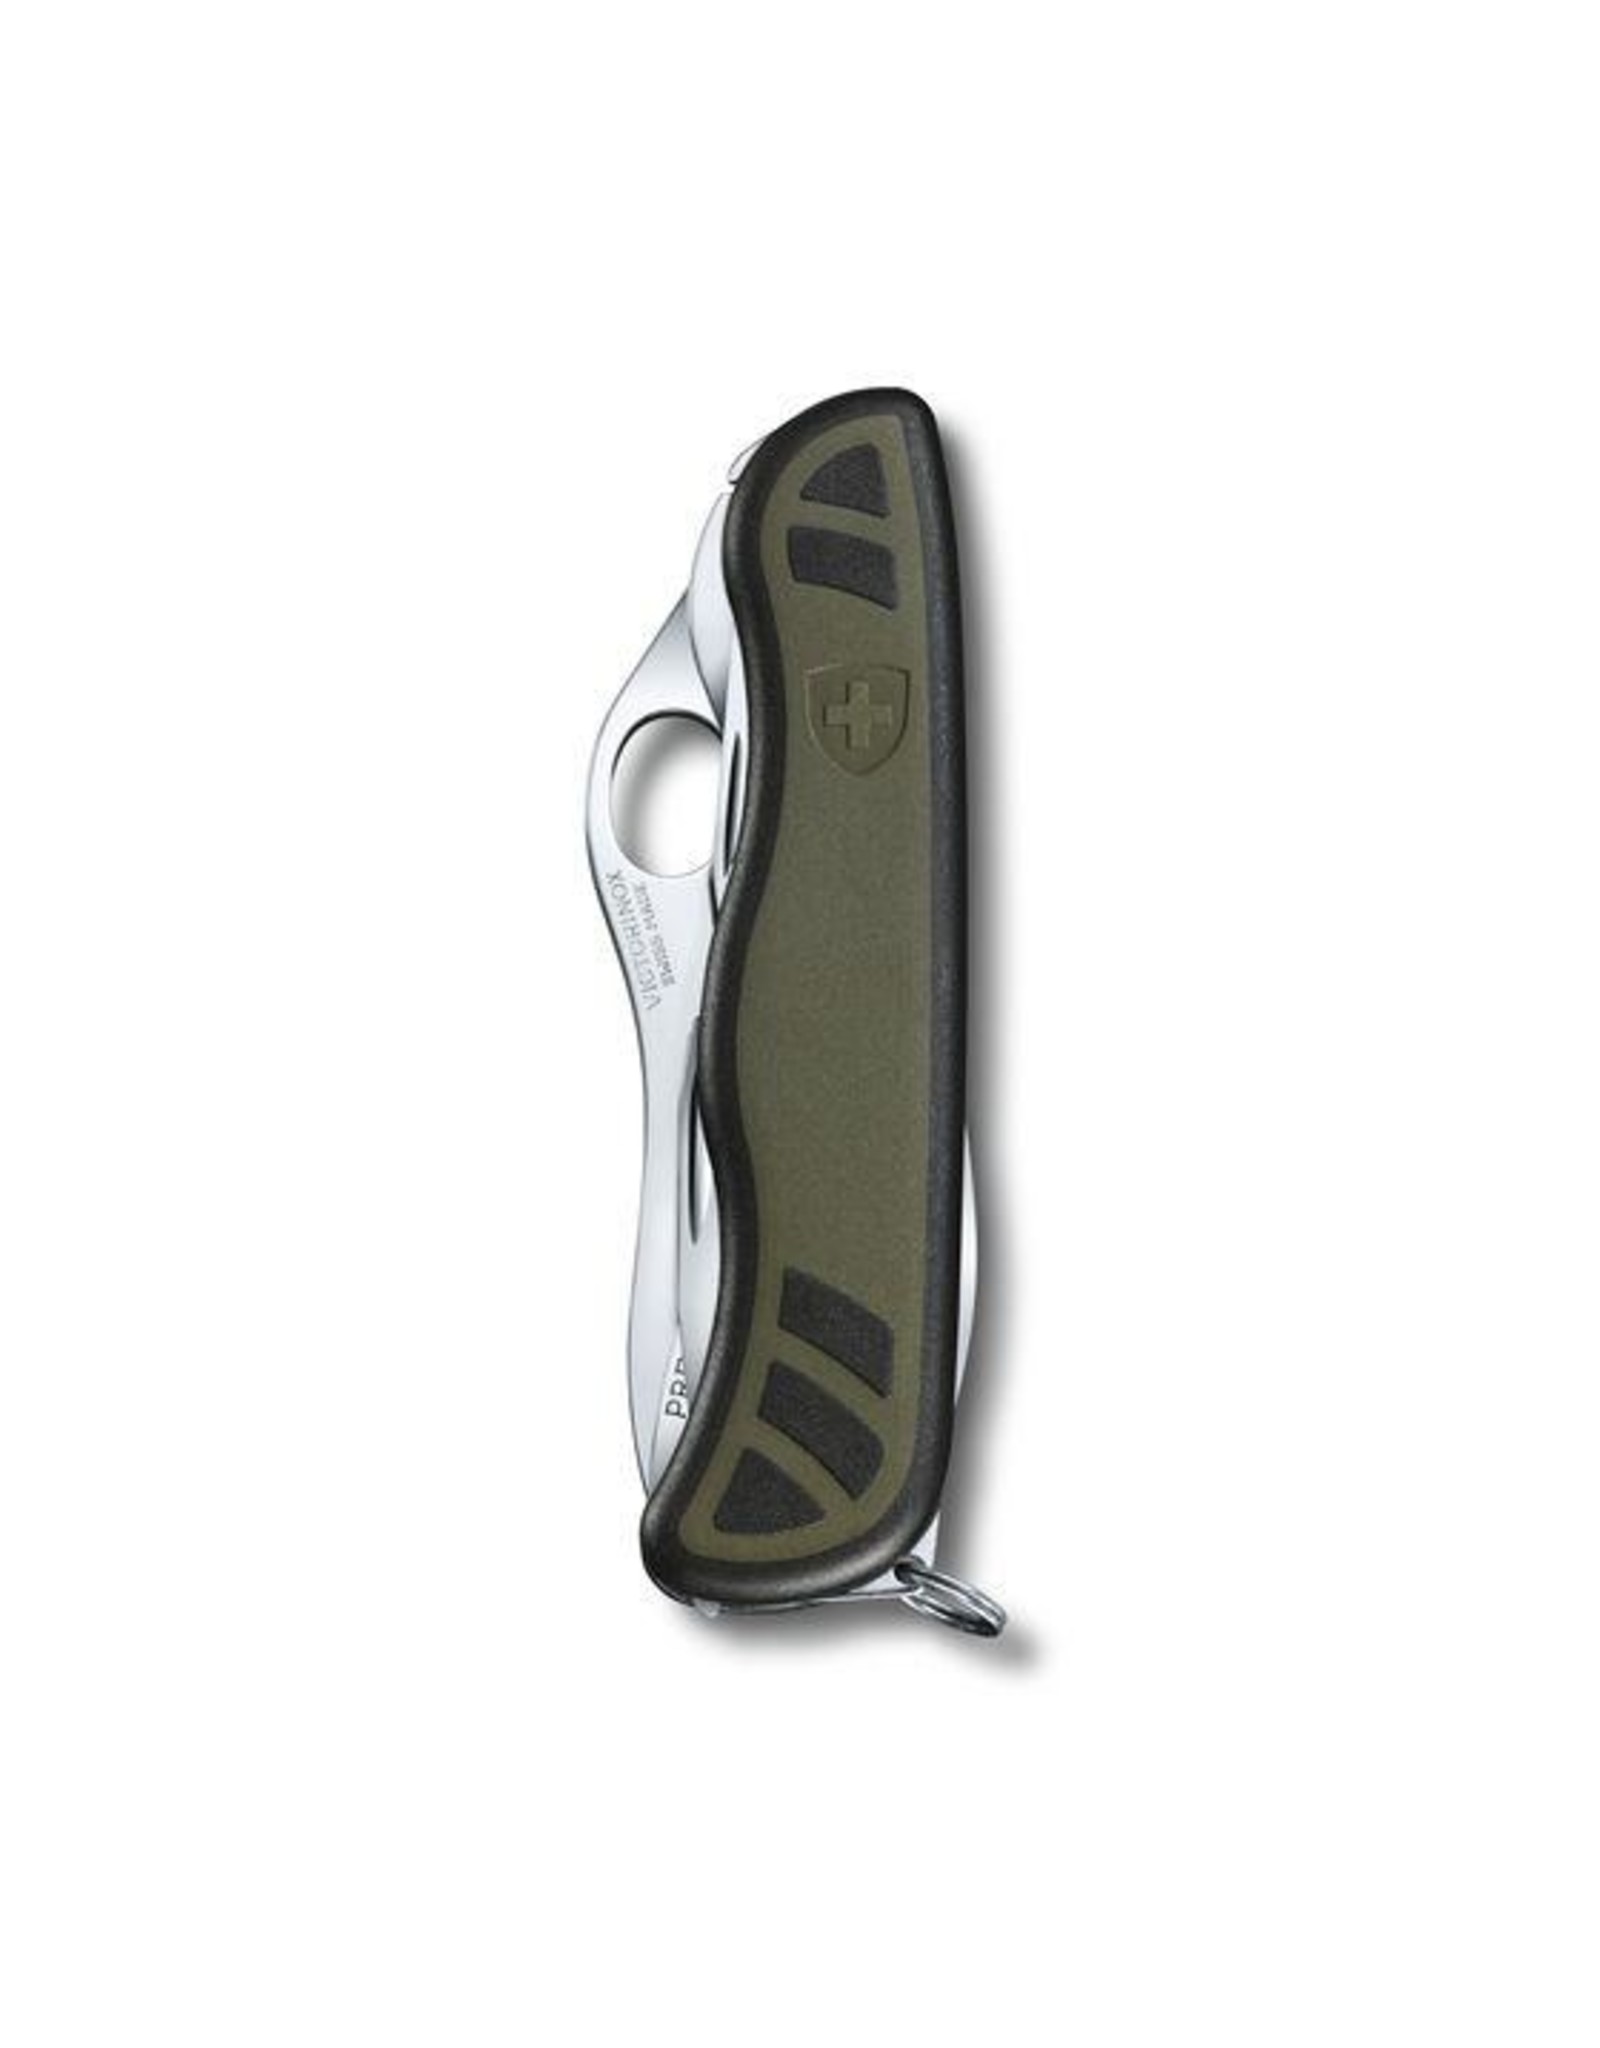 VICTORINOX SWISS ARMY SOLDIER STANDARD ISSUED KNIFE